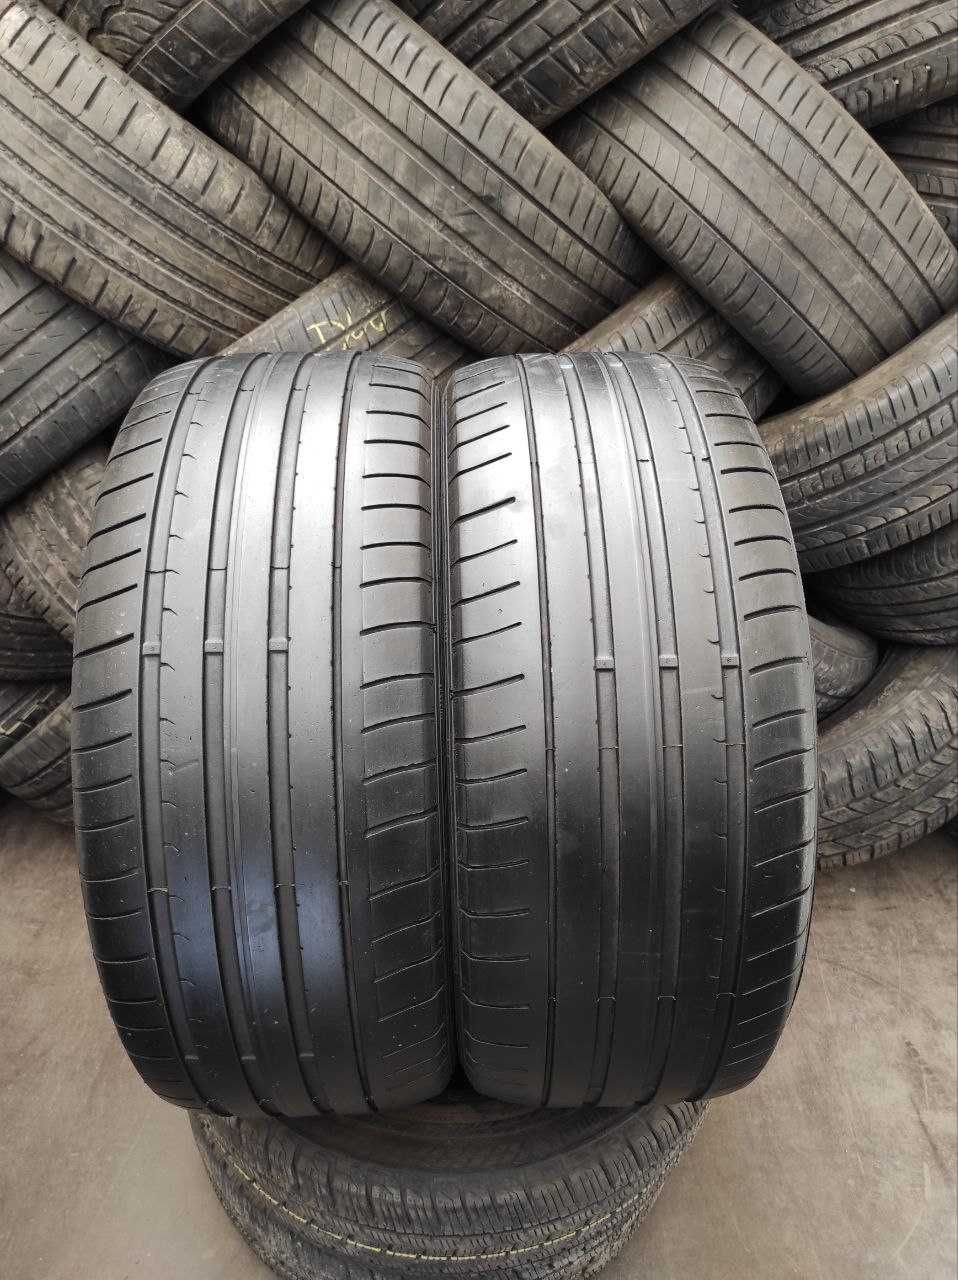 Dunlop SP Sport Maxx GT 245/45r18 made in Germany 2шт 18год, 5мм, ЛЕТО